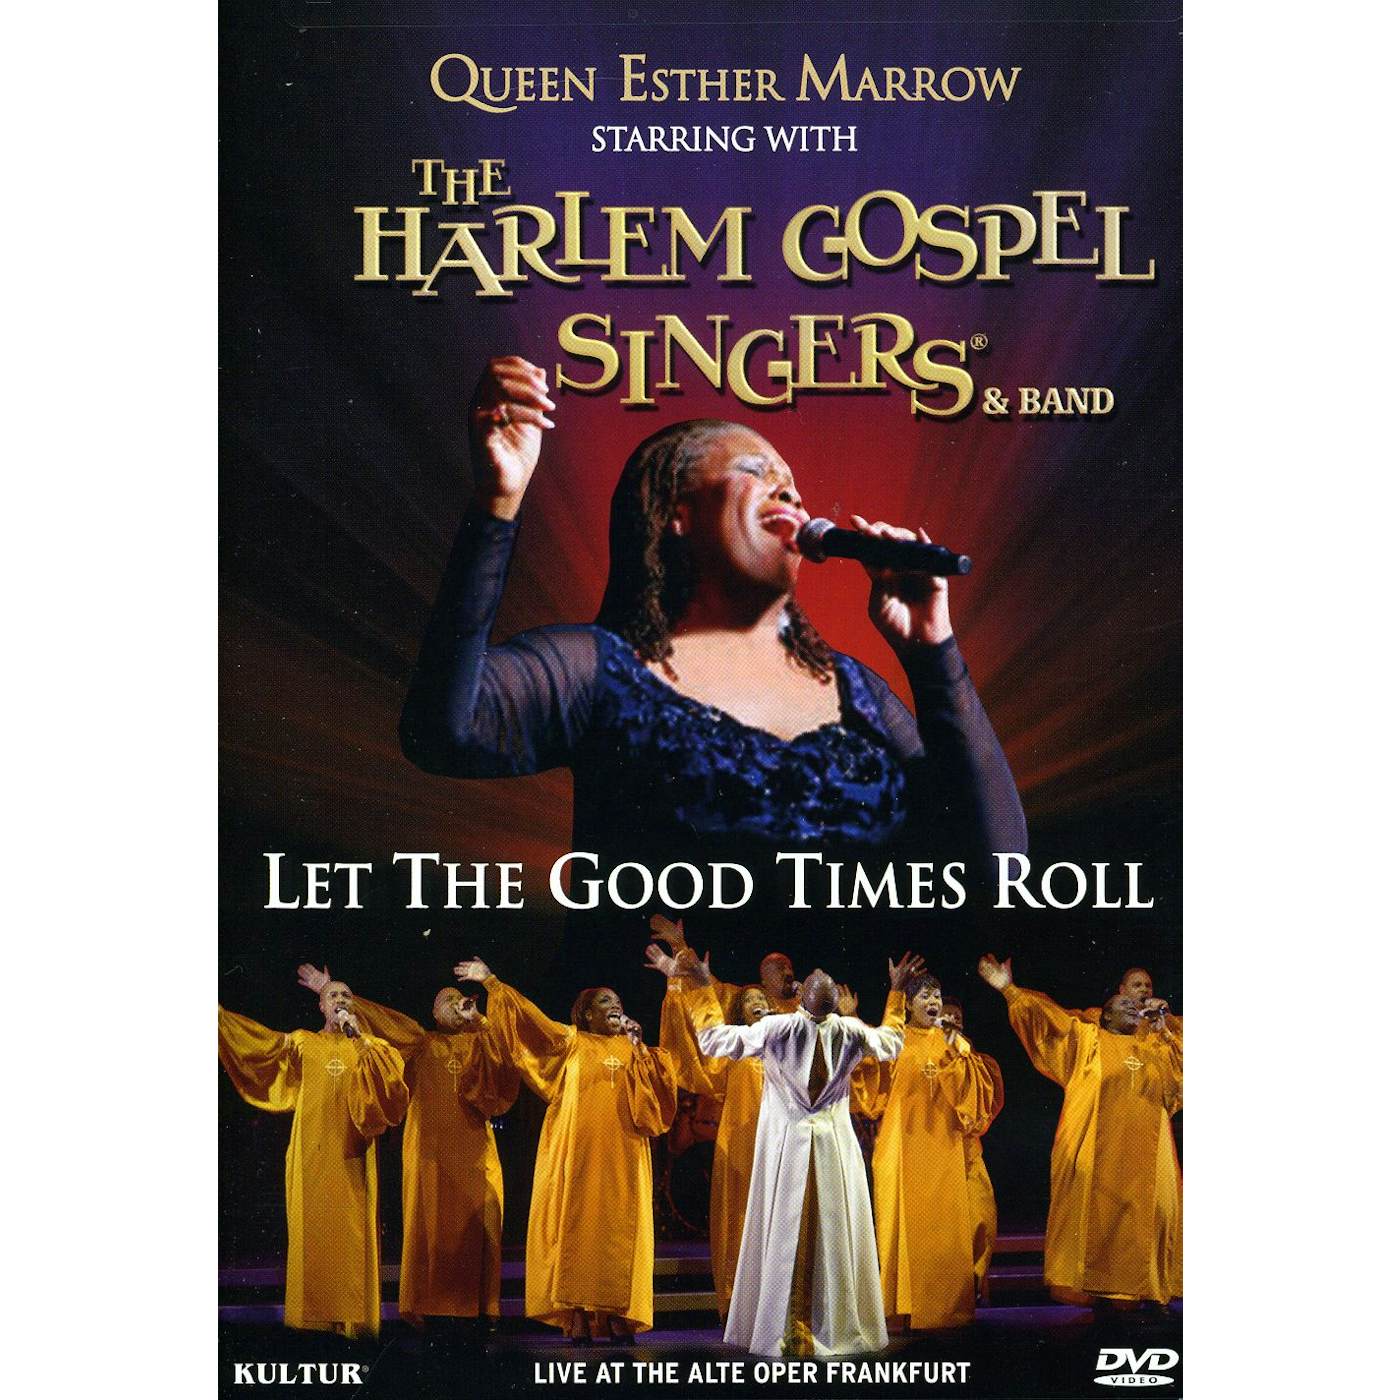 Queen Esther Marrow LET THE GOOD TIMES ROLL DVD